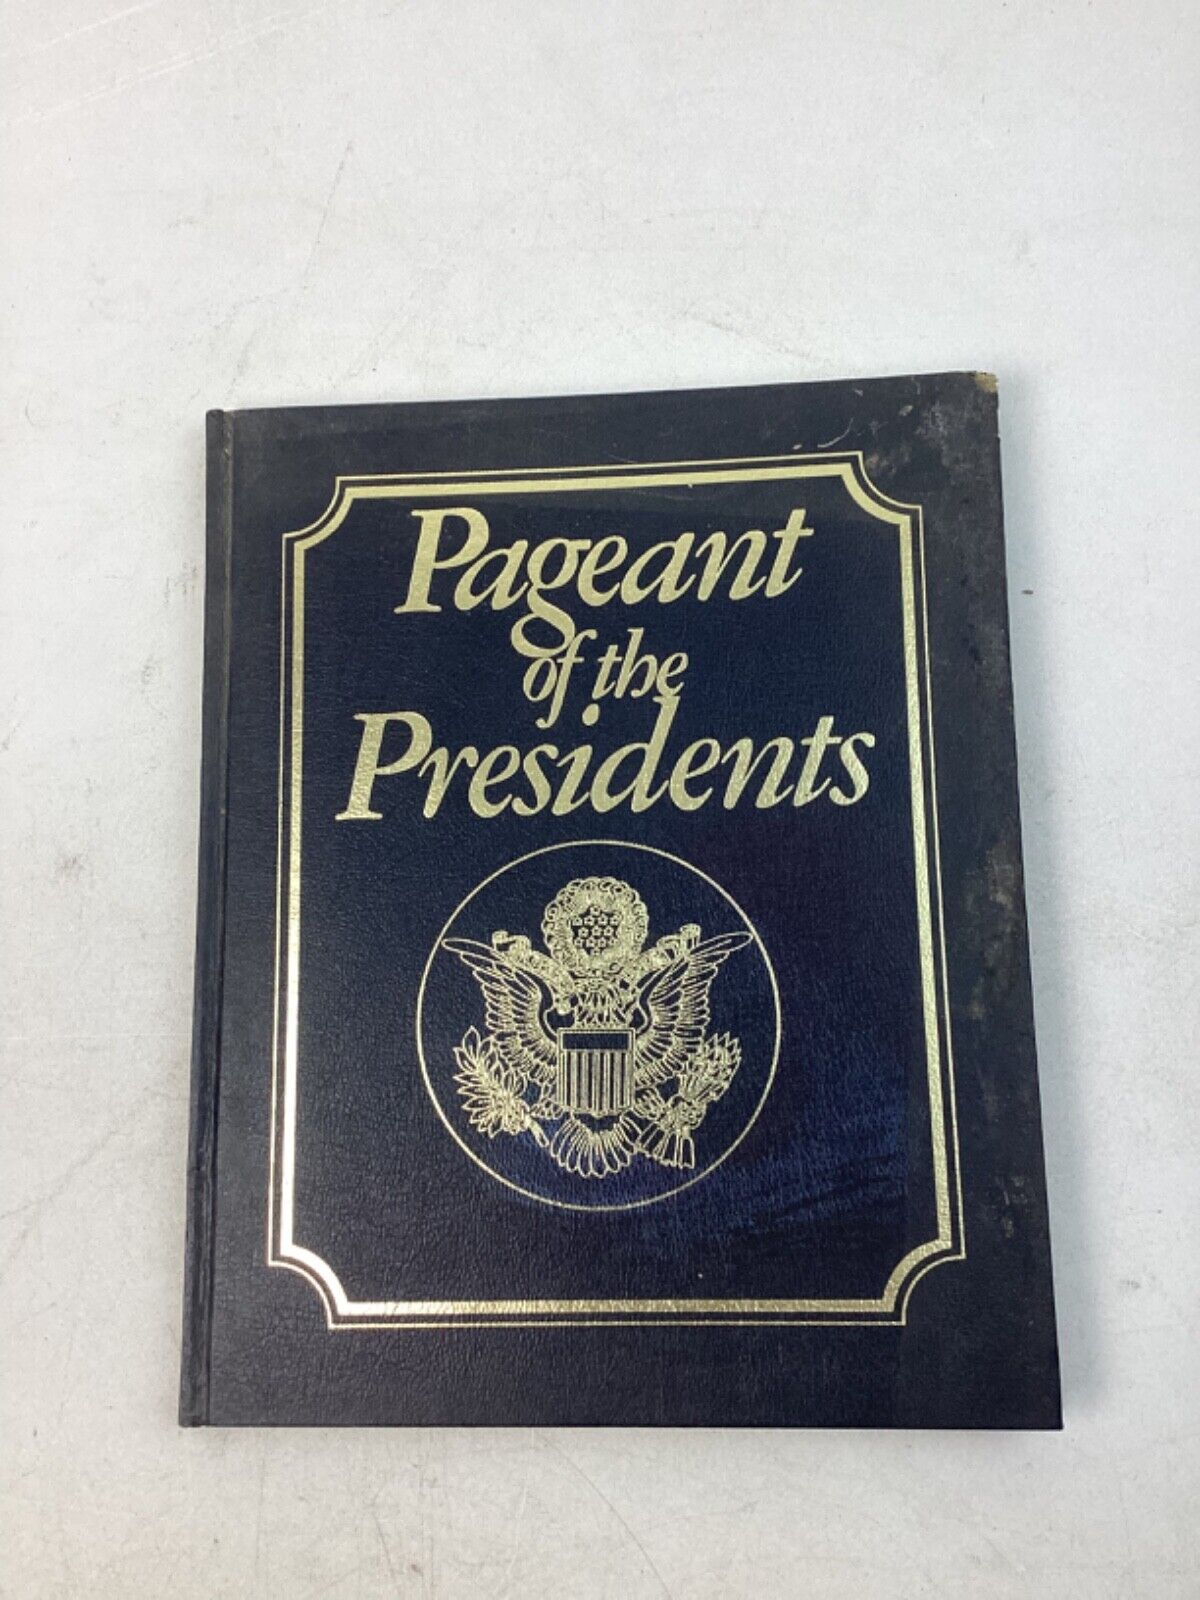 Vintage 1975 Pageant of the Presidents Hardcover Book - 13.25” X 10.5”